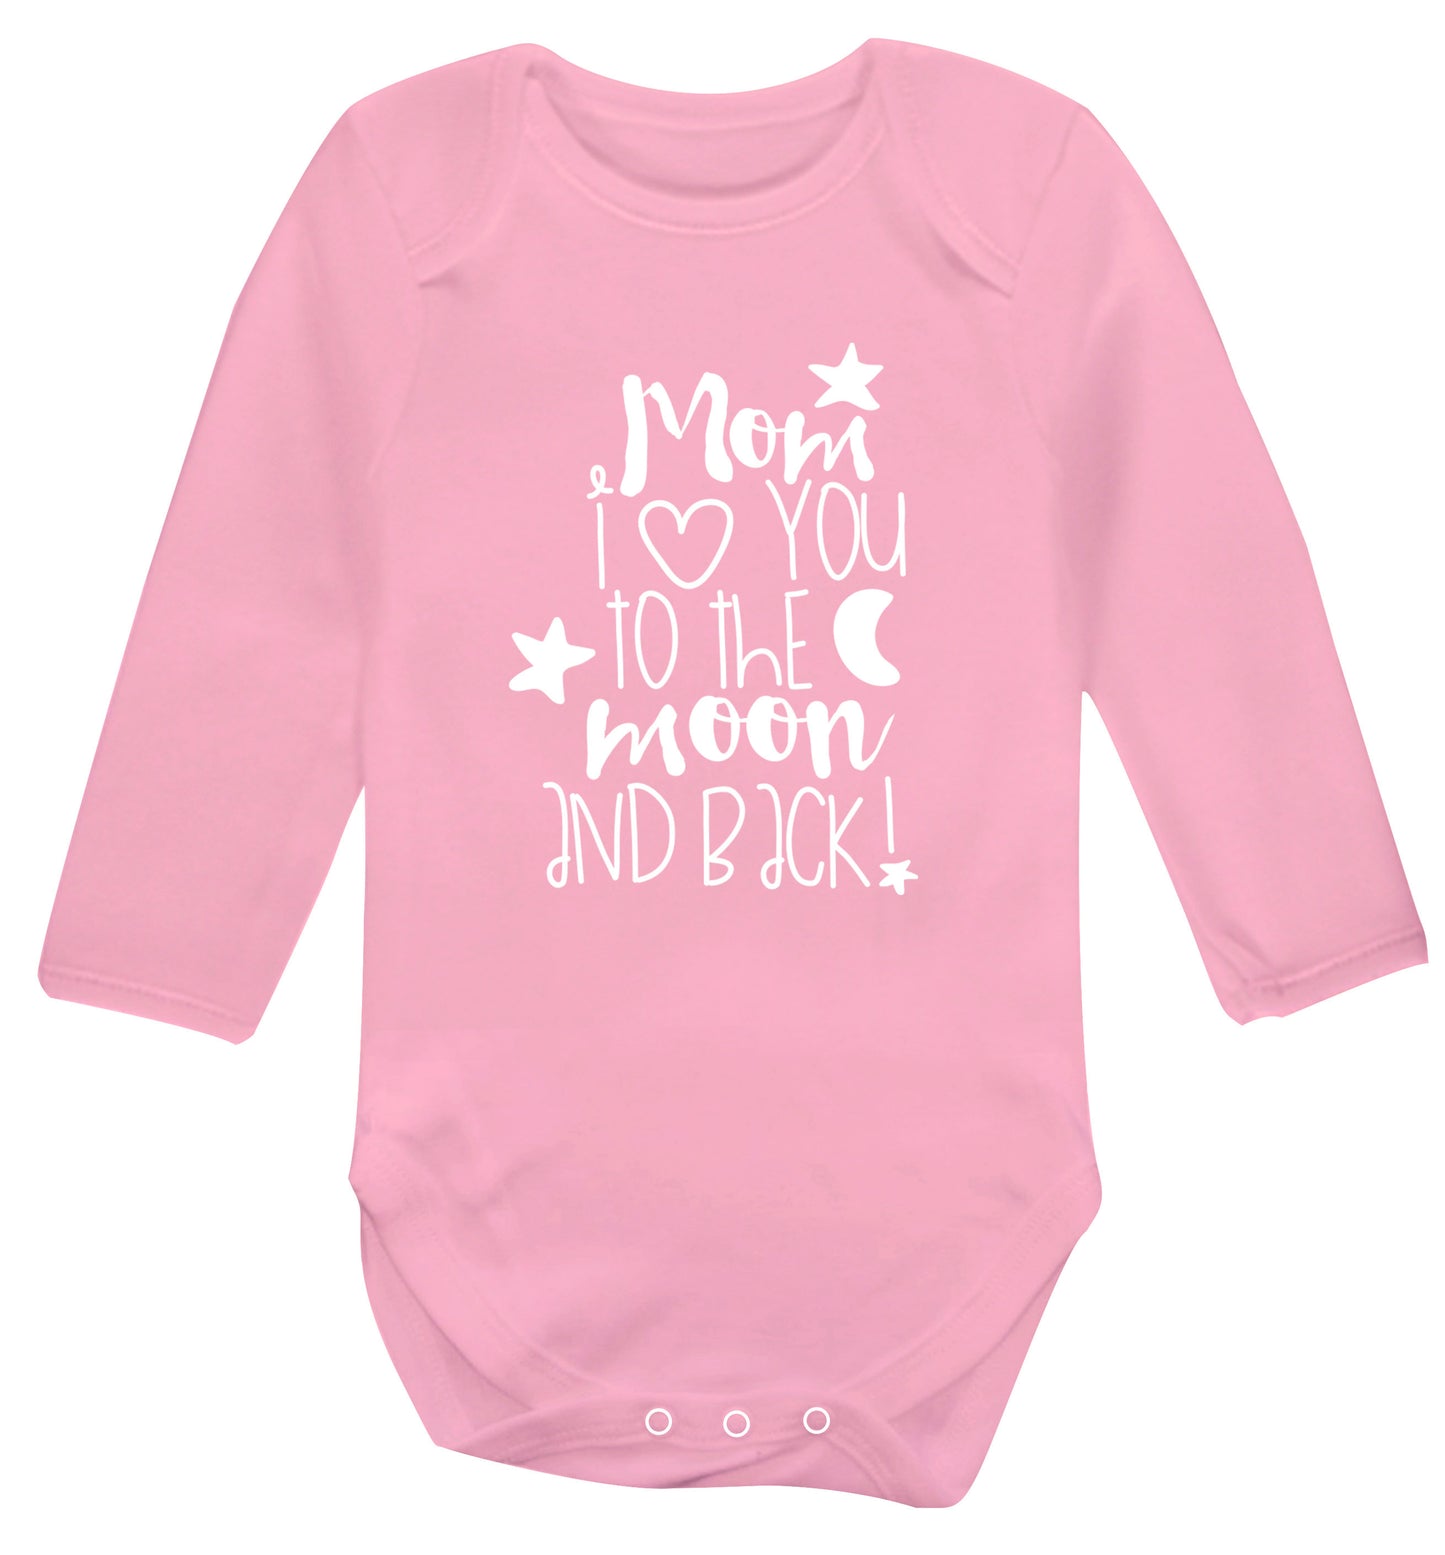 Dad I love you to the moon and back Baby Vest long sleeved pale pink 6-12 months